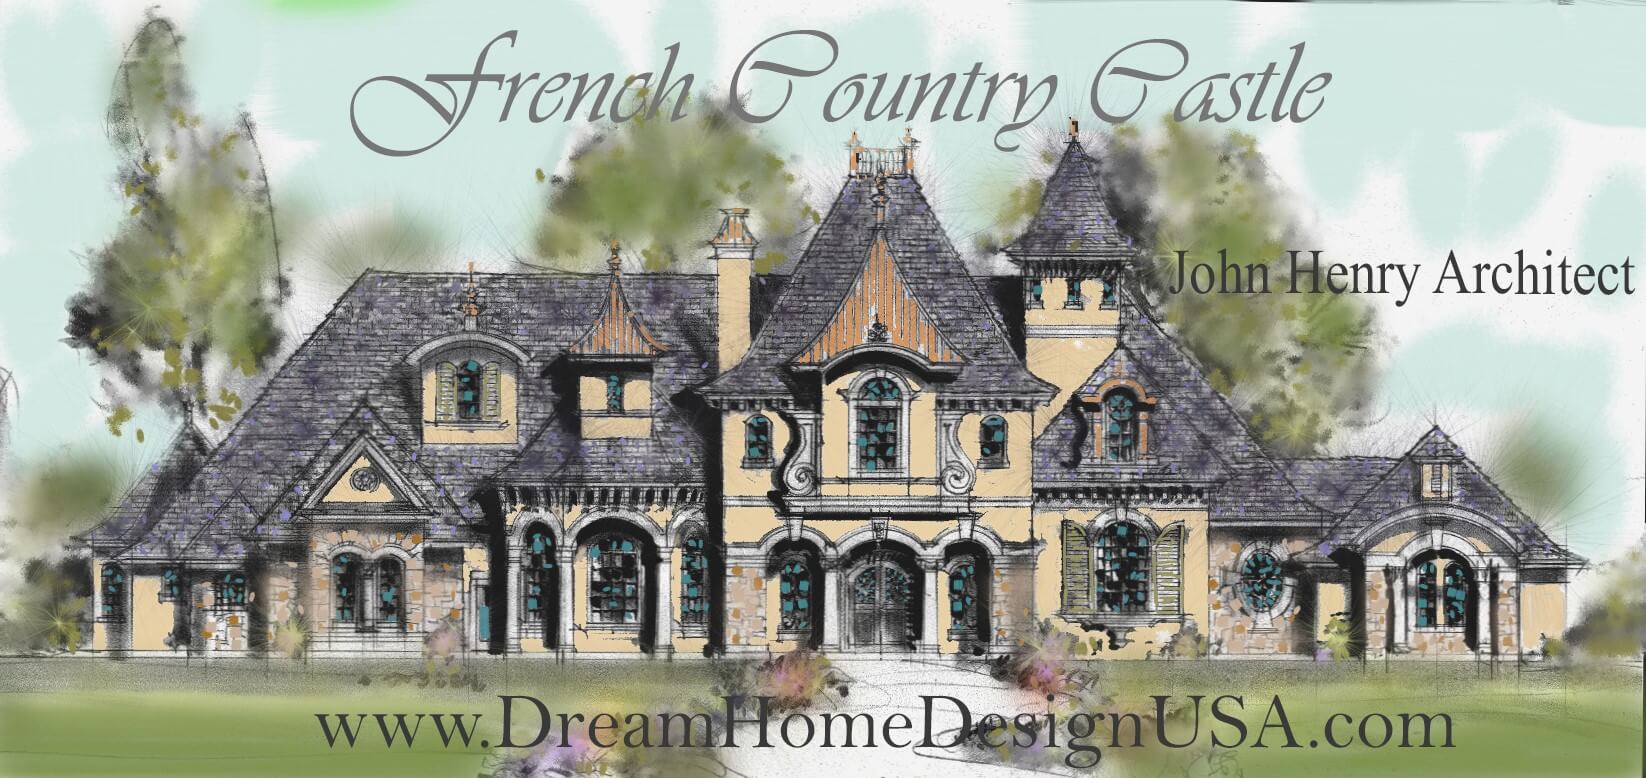 french country castle dreamhomedesignusa